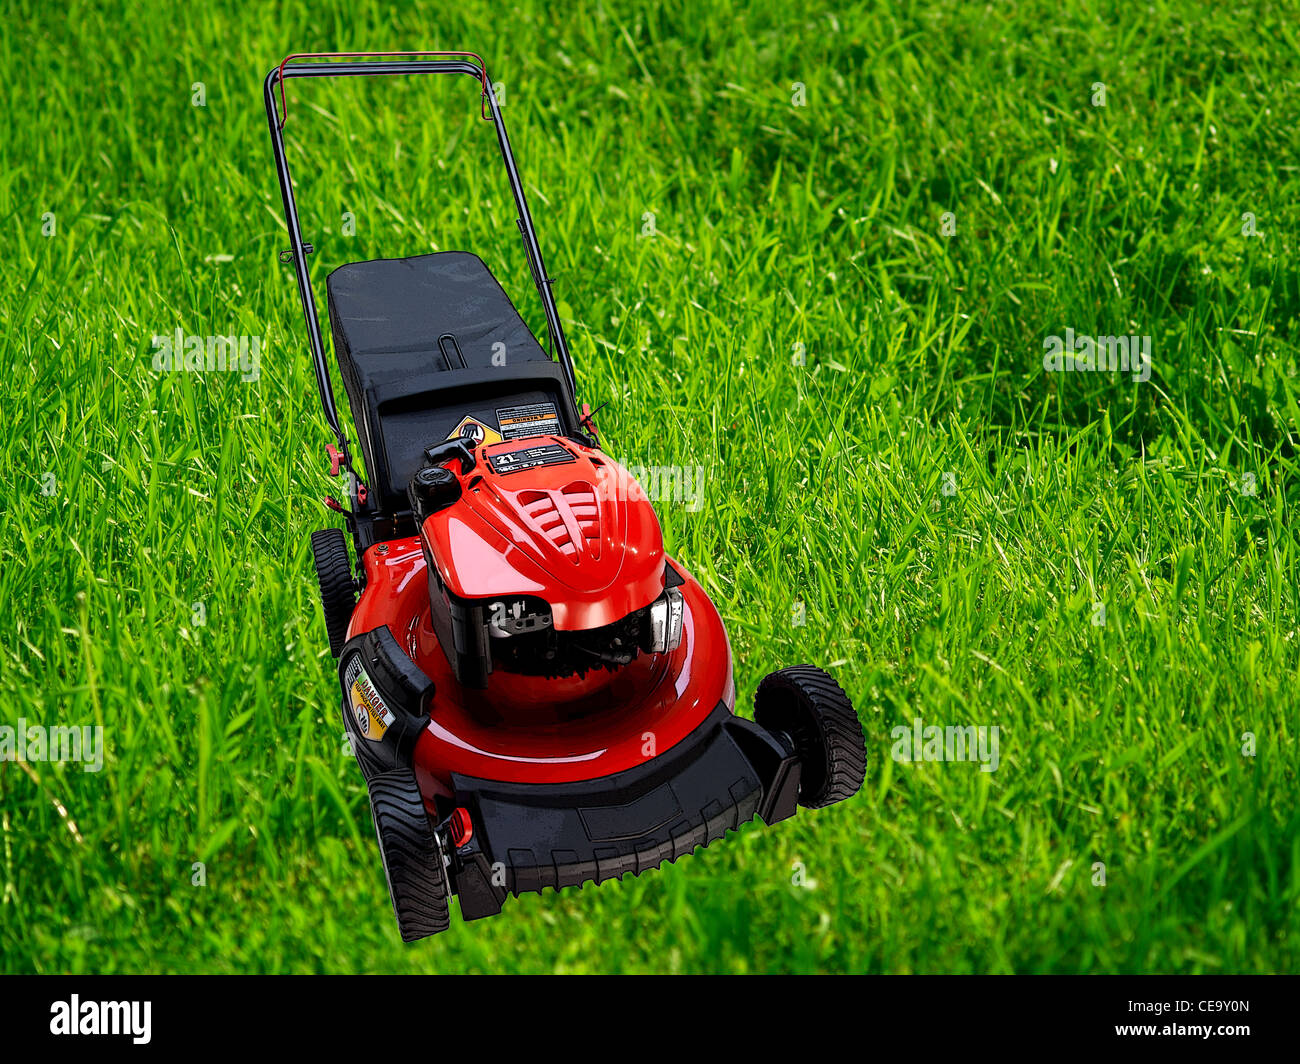 Lawn mower on big grass background Stock Photo